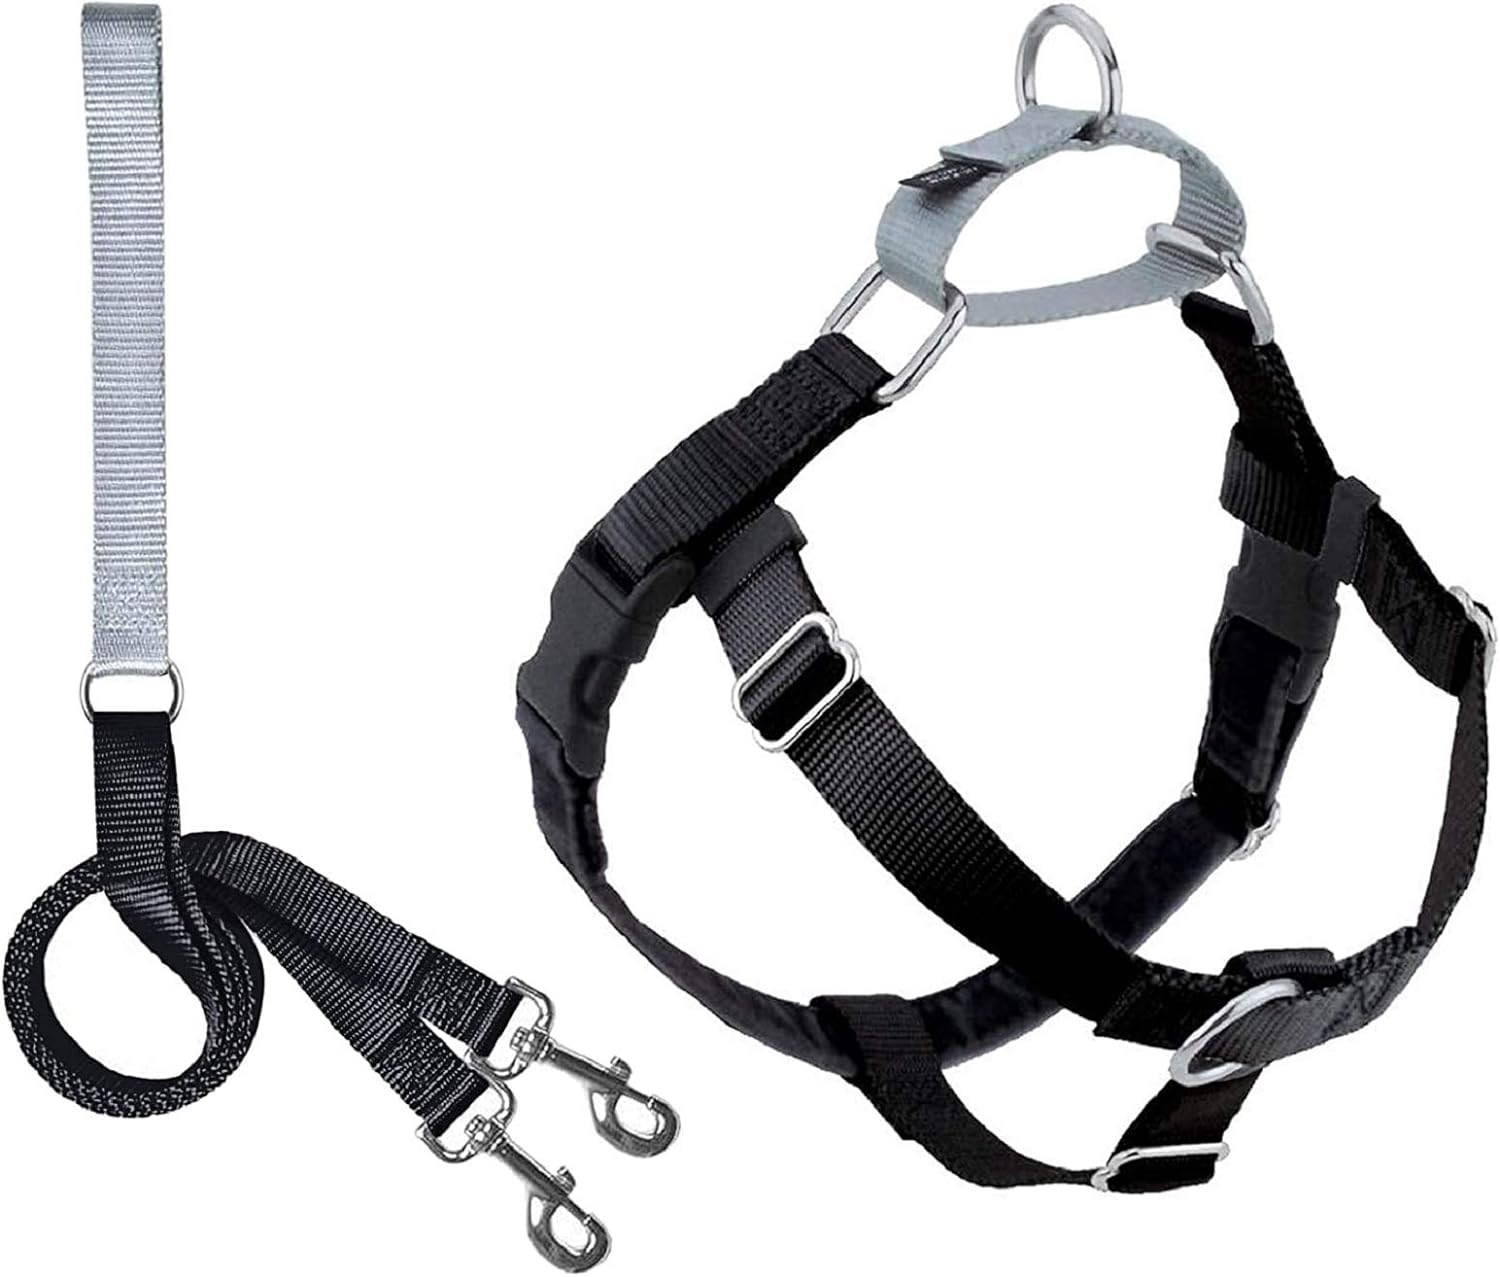 2 Hounds Design Freedom No Pull Dog Harness | Comfortable Control for Easy Walking |Adjustable Dog Harness and Leash Set | Small, Medium  Large Dogs | Made in USA | Solid Colors | 1 MD Black